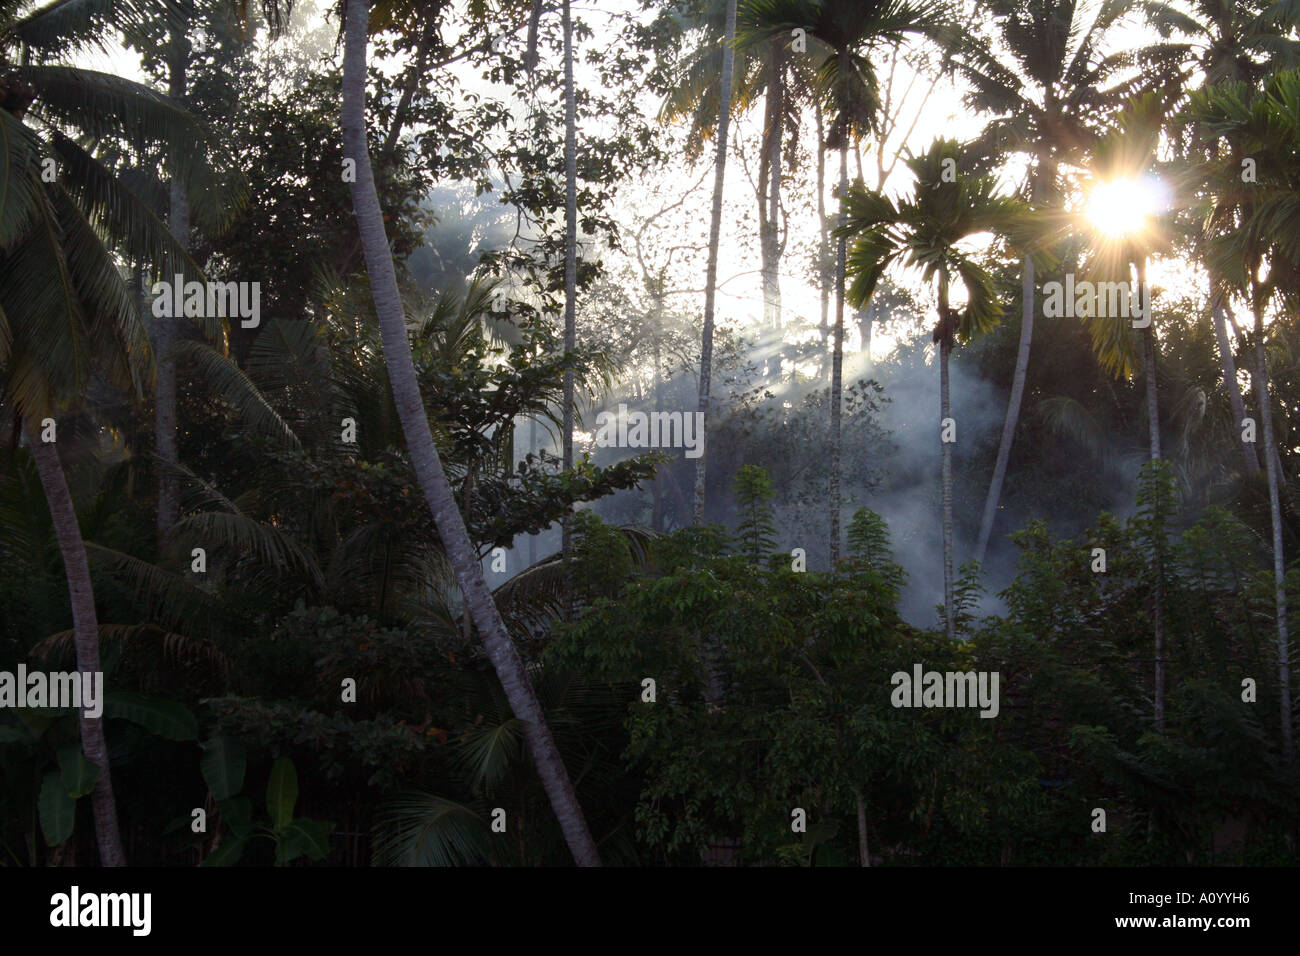 Sun bursting through the trees in the backwaters of kerala in india Stock Photo